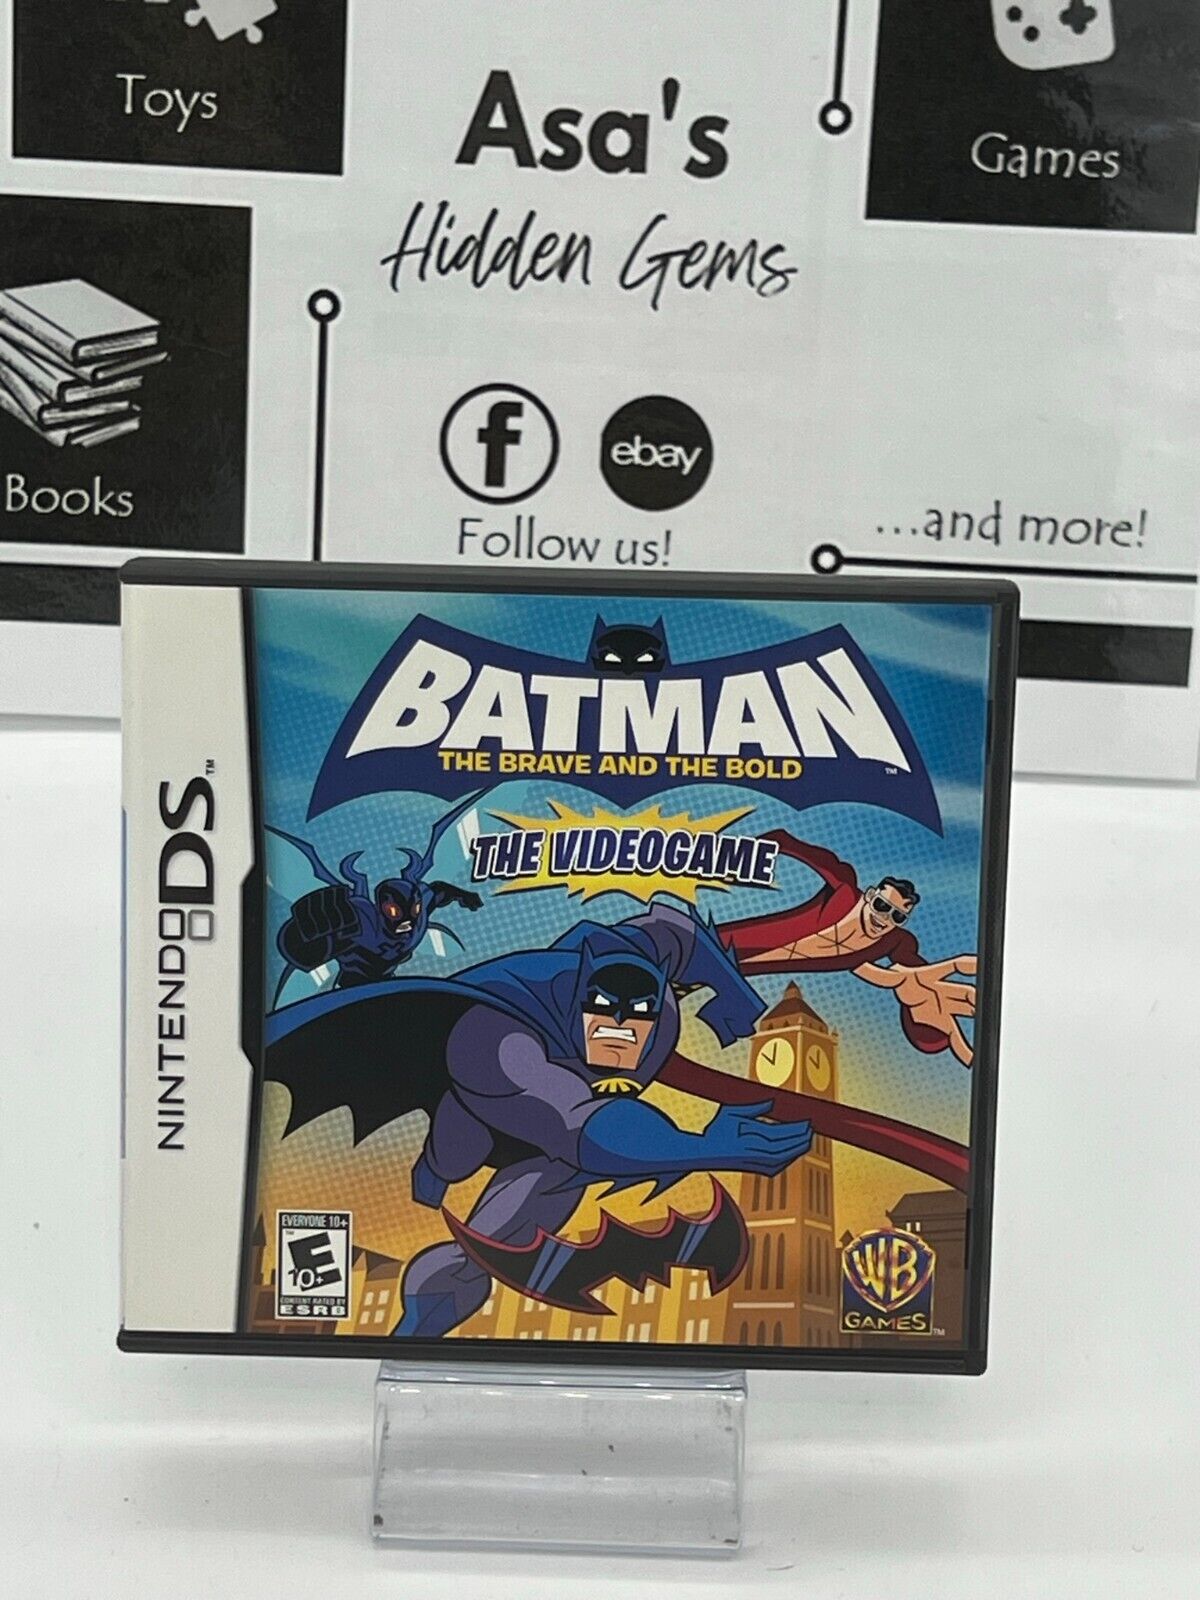 Batman: The Brave and the Bold - The Videogame (Nintendo DS, 2010) - Tested